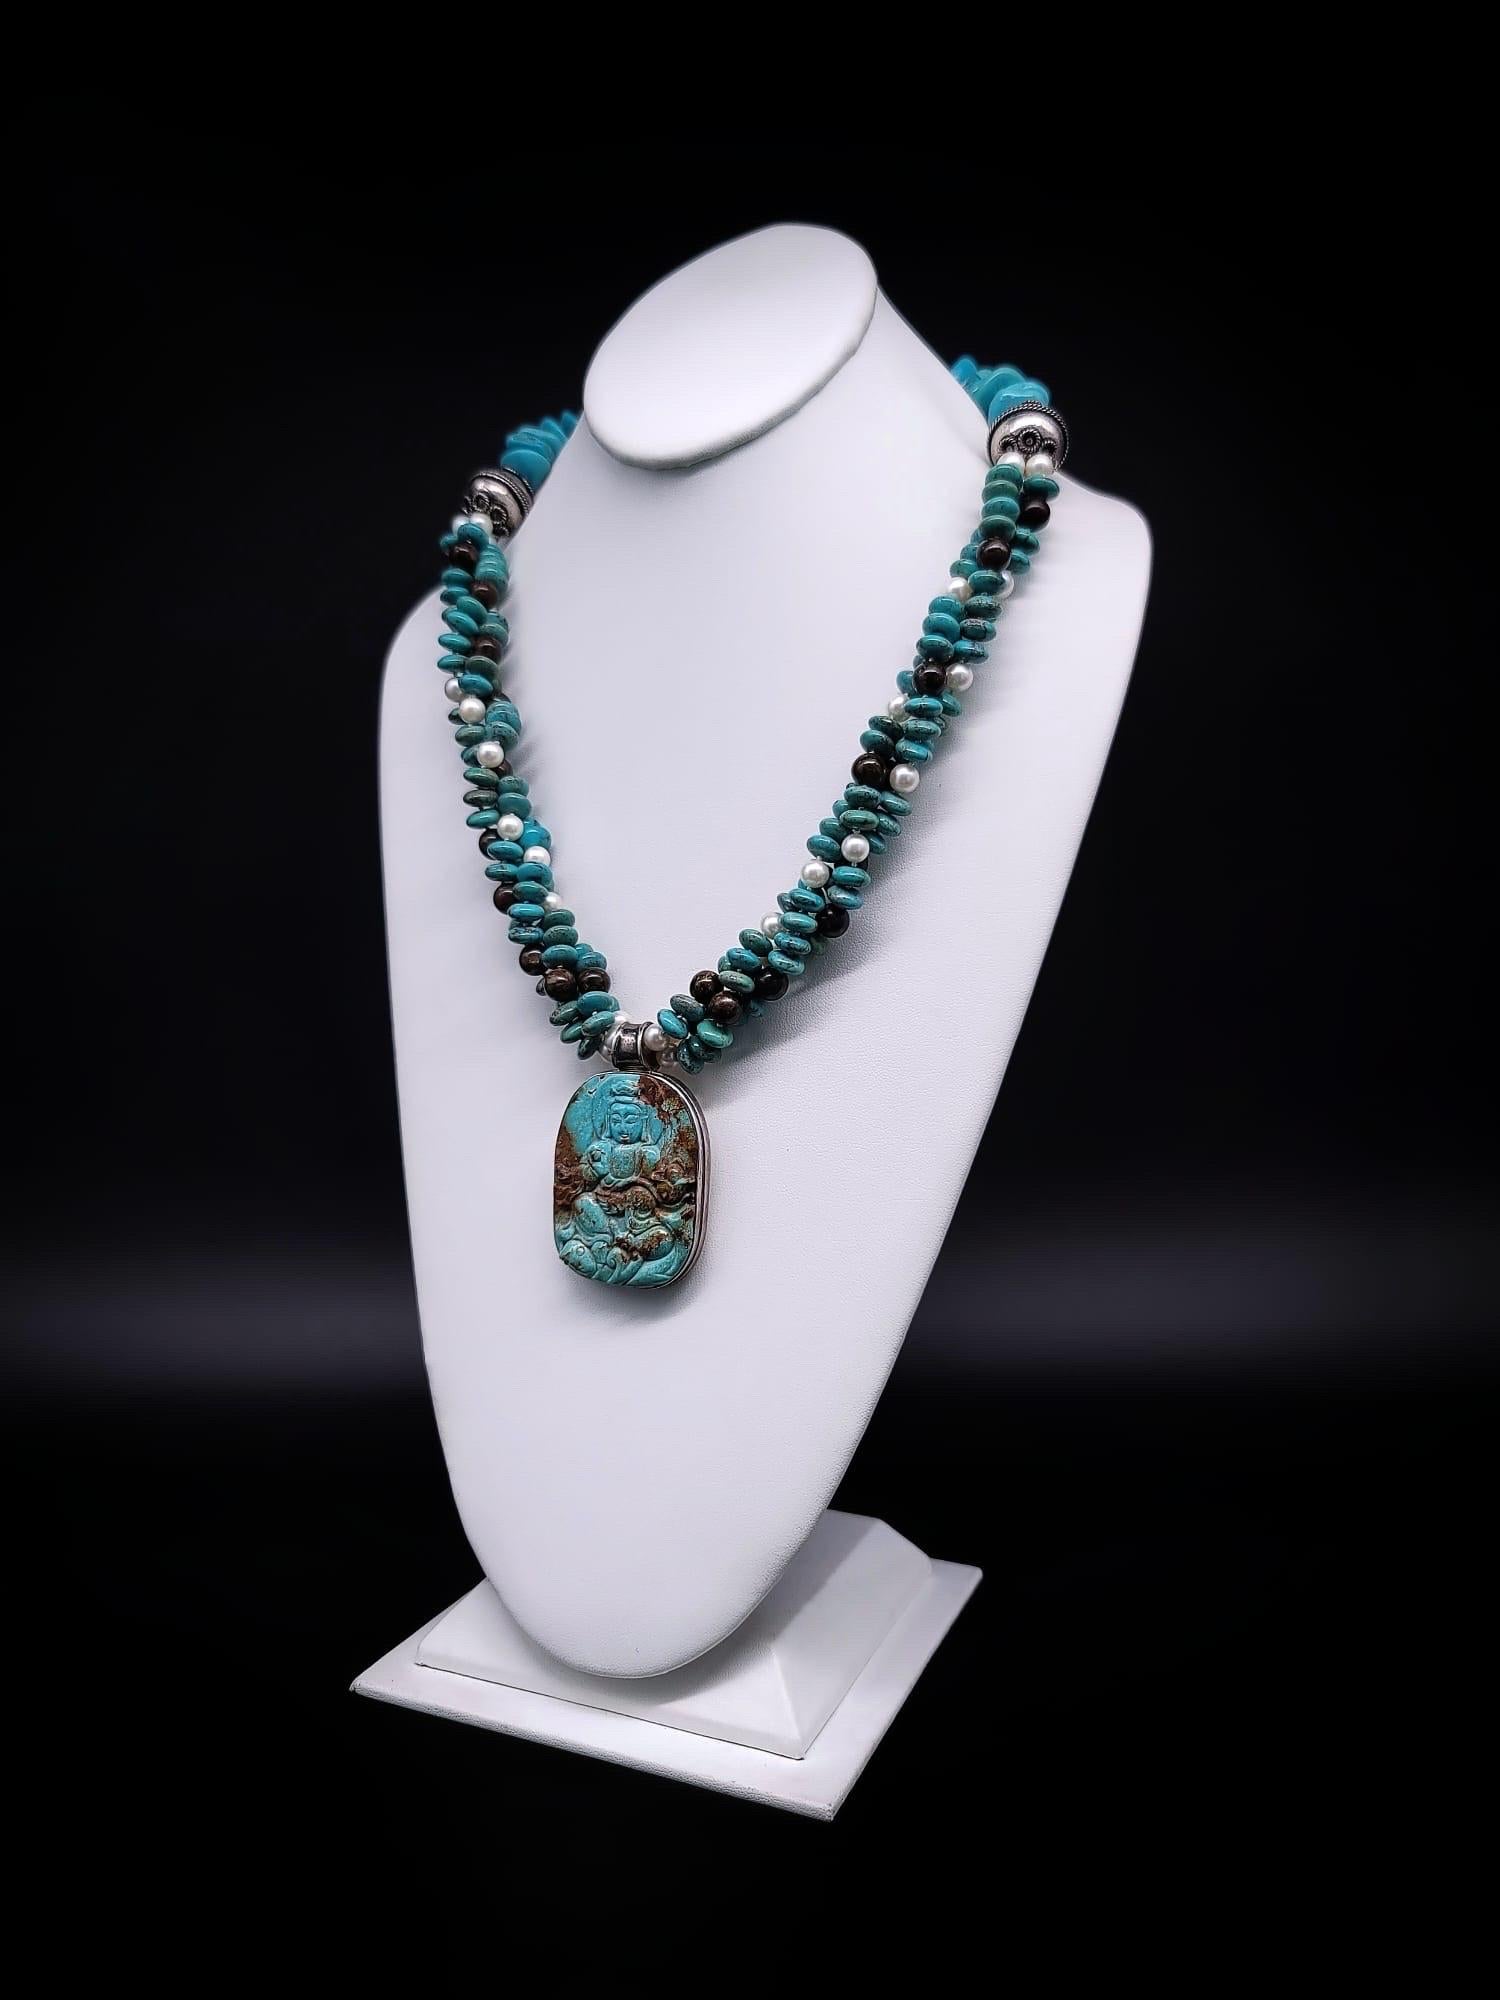 Contemporary A.Jeschel Australian Opal and Turquoise necklace with a Buddha carved pendant. For Sale